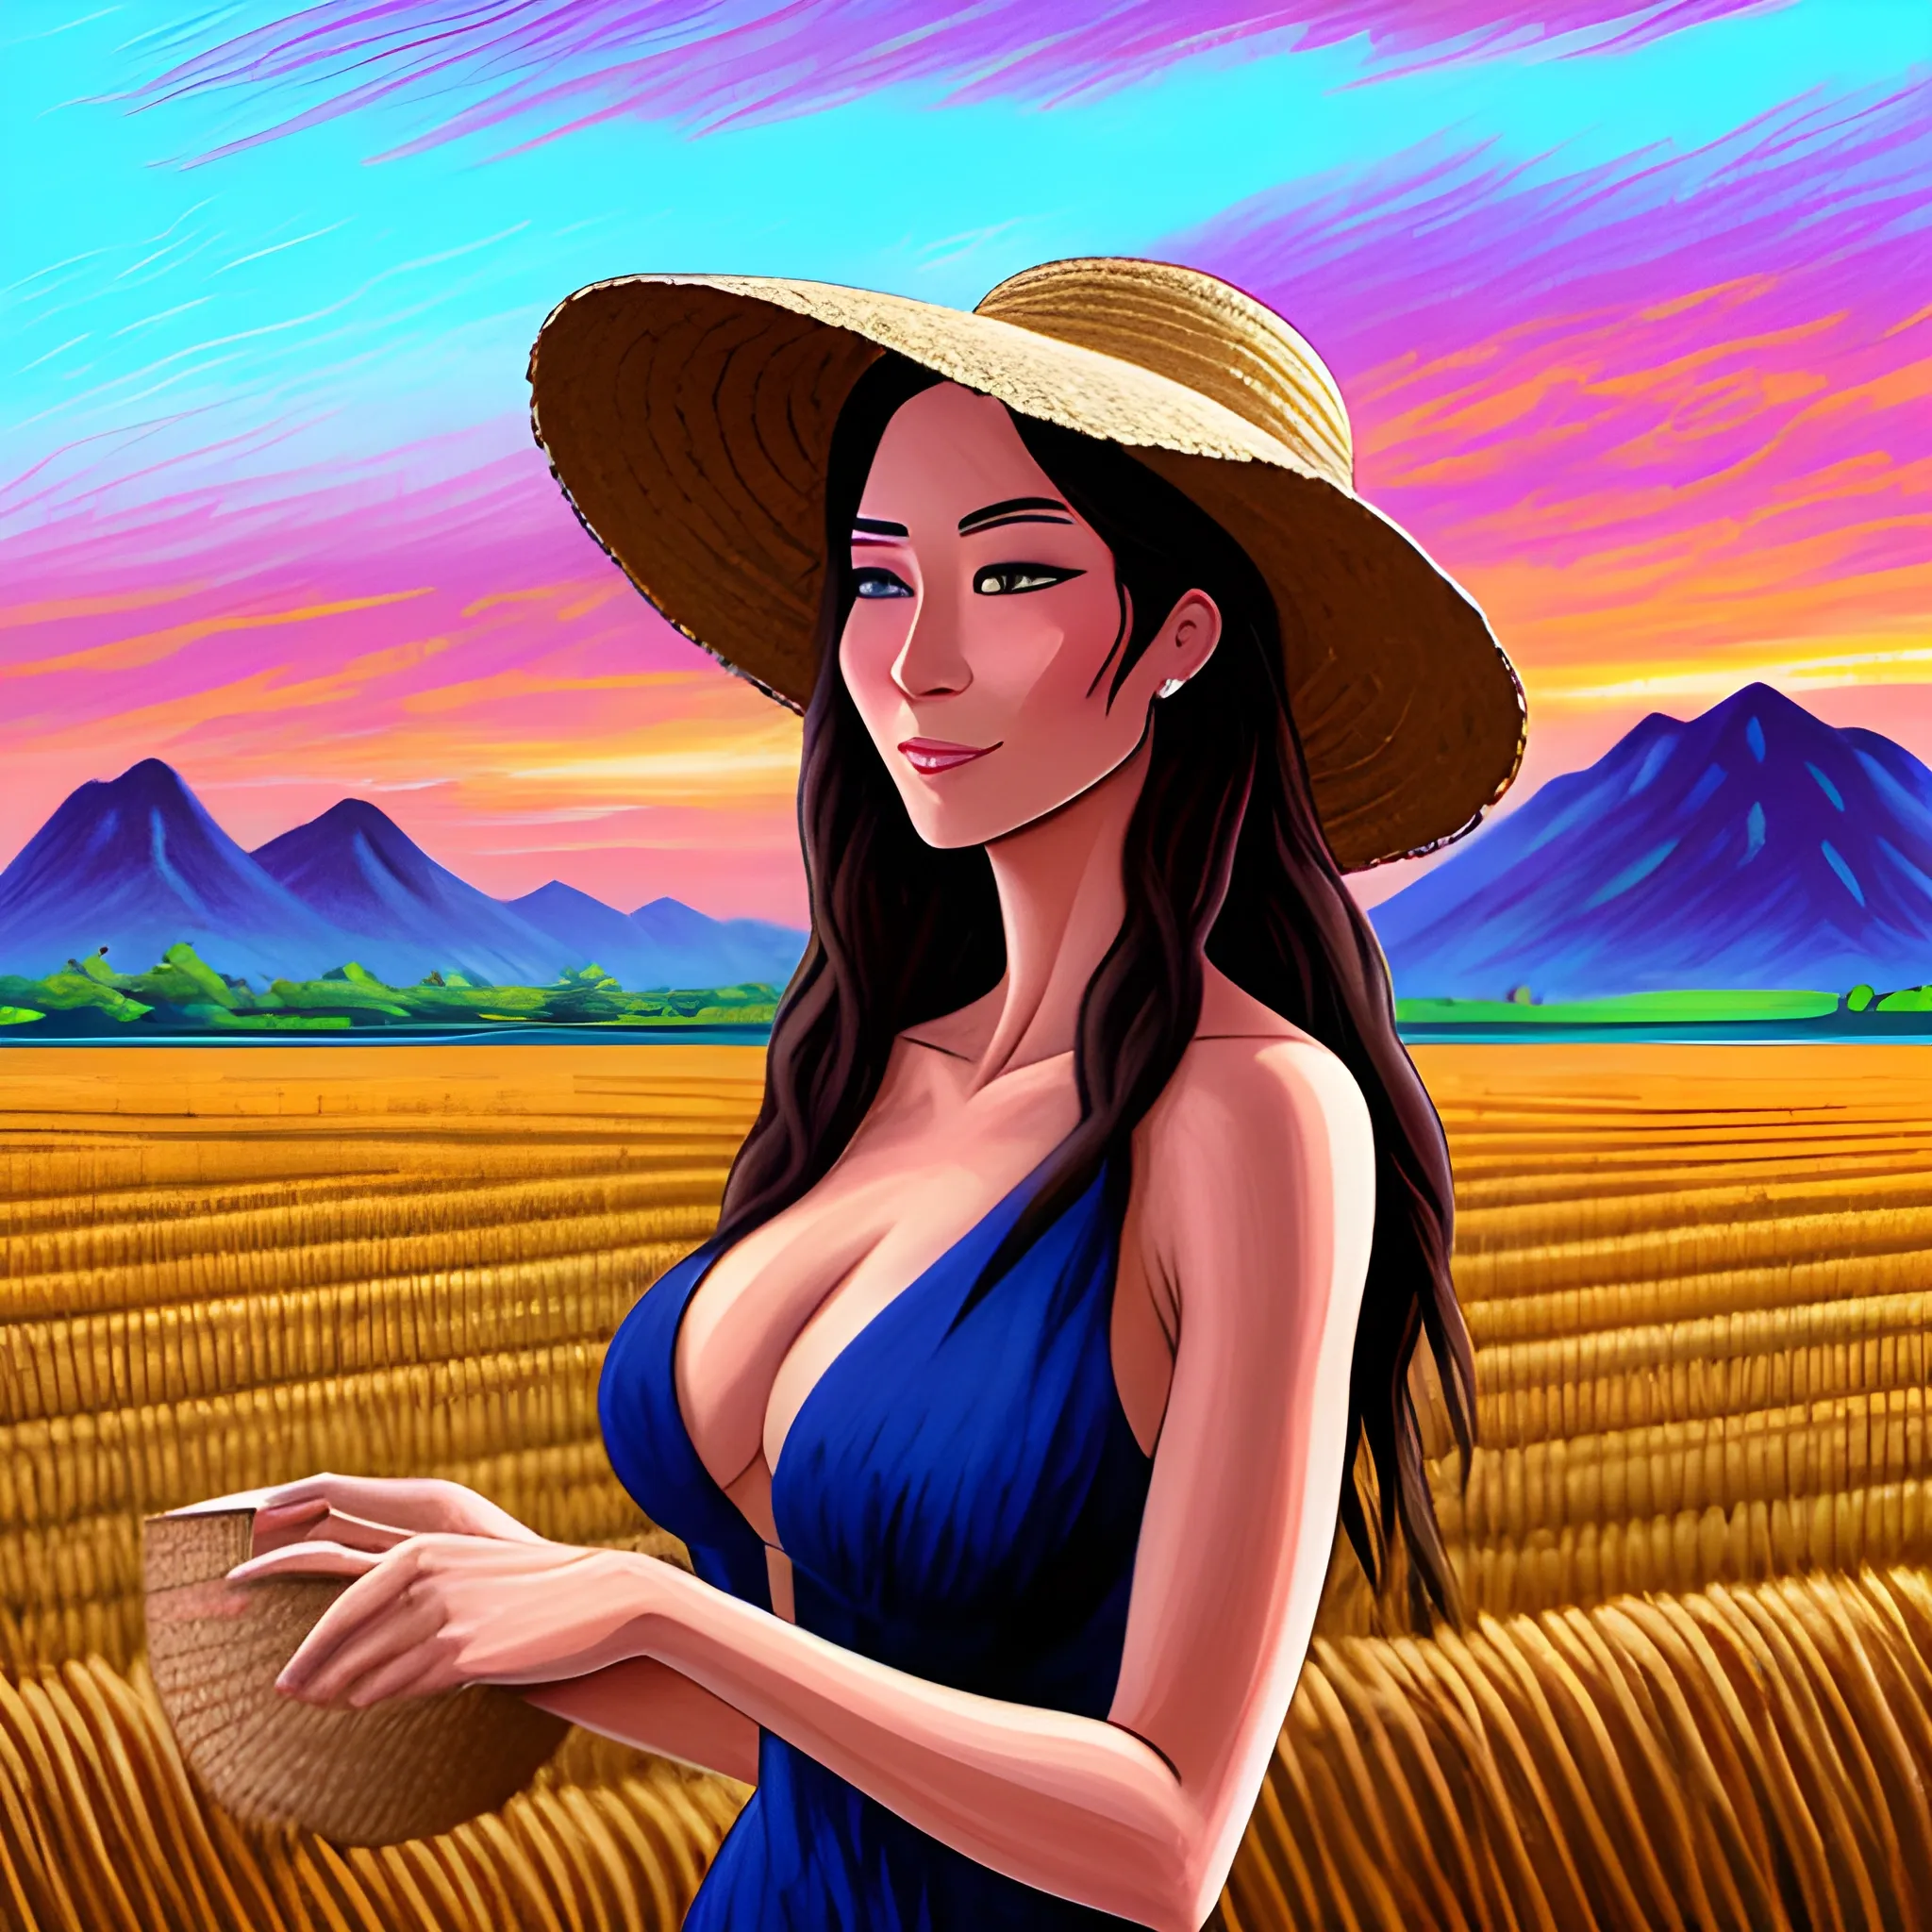 (((high detail))), best quality, 1girl,full frame, working in a rice field, straw hat,dark brown long flowing hair blowing in the wind, mountains in the far background, sunset,<lora:more_details:0.7>, Oil Paint, Pastel Art, Cartoon, Cartoon, Cartoon, Cartoon, Cartoon